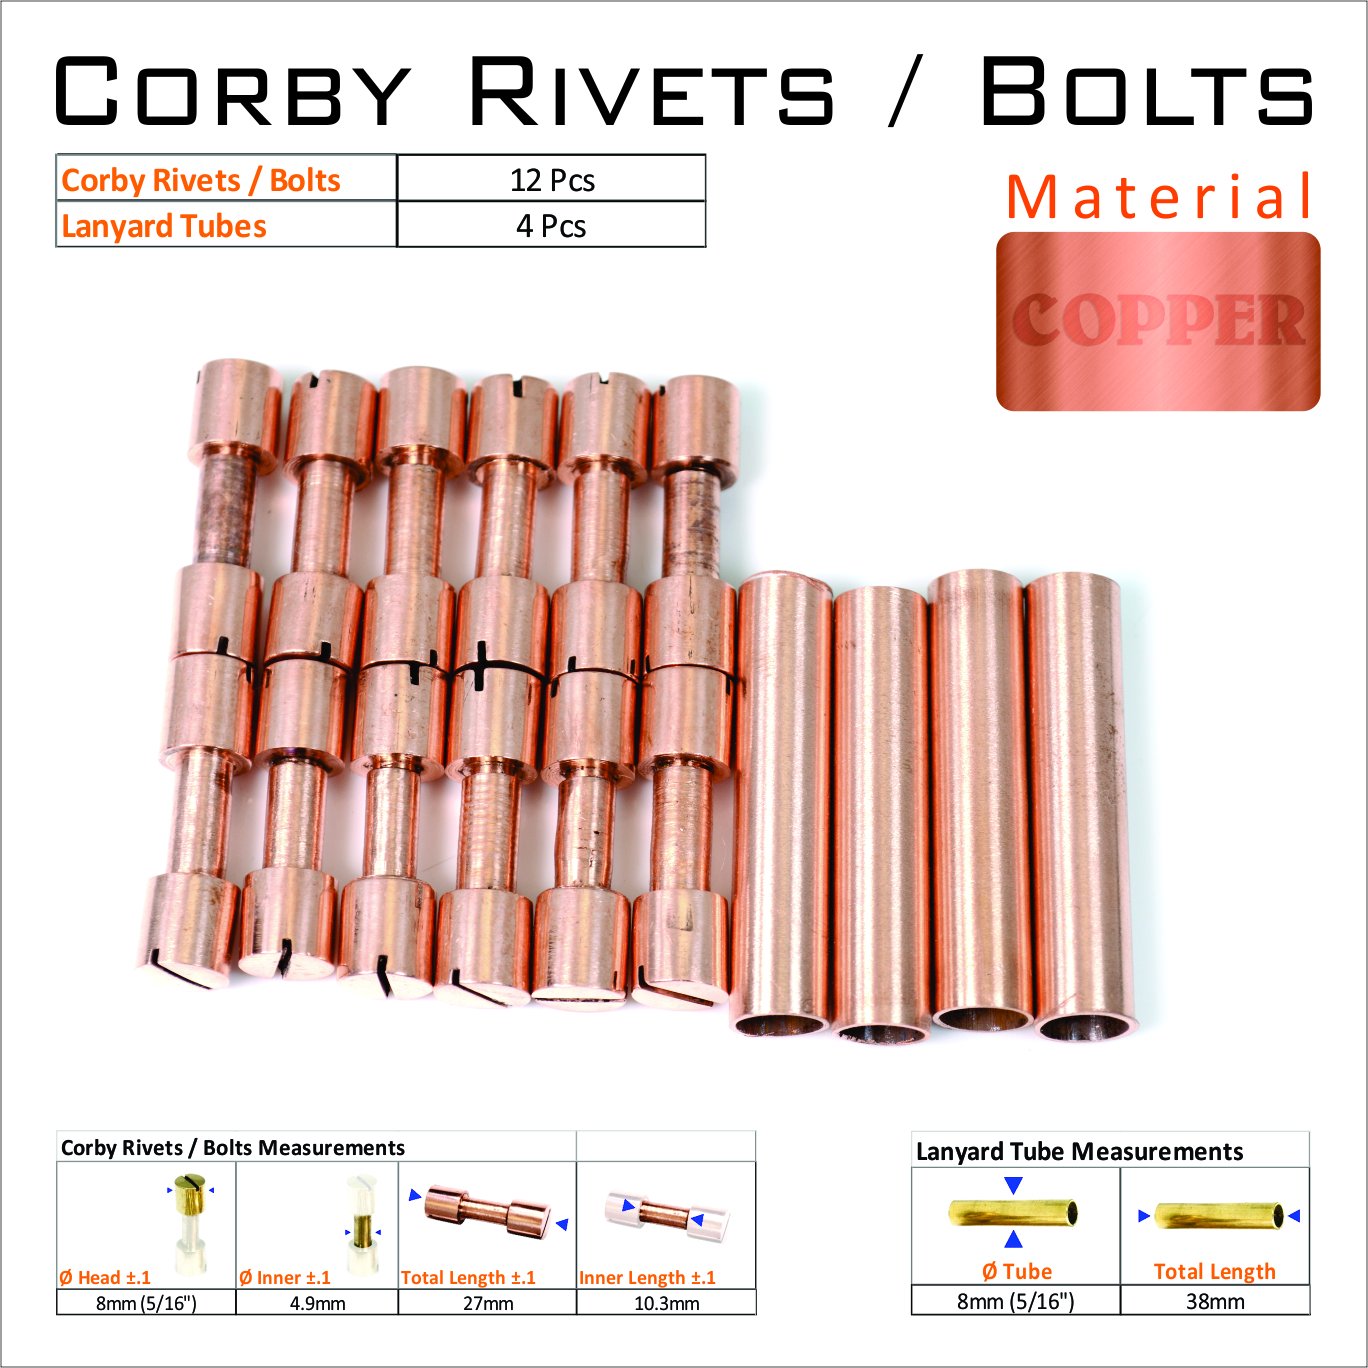 12 Copper Corby Rivets 4 Copper lanyard Tubes For Knifemaking Supplies Knife Mounting Hardware